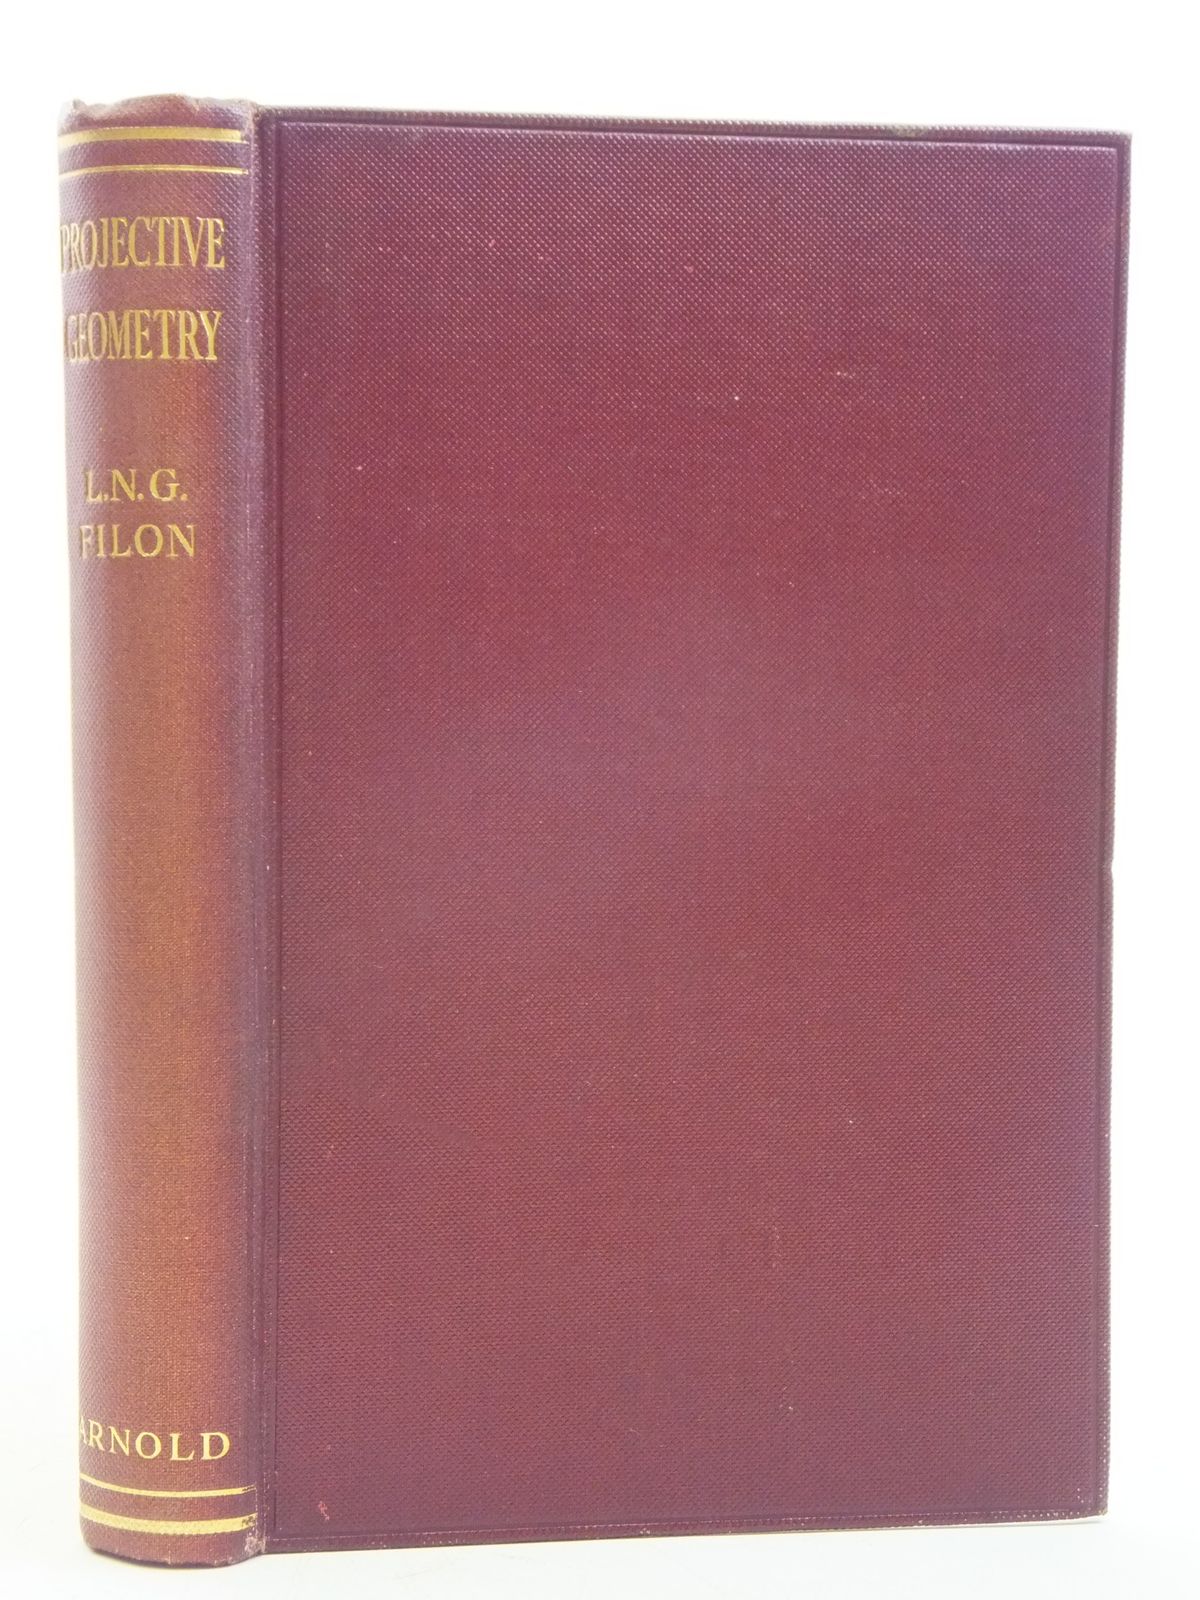 Photo of AN INTRODUCTION TO PROJECTIVE GEOMETRY written by Filon, L.N.G. published by Edward Arnold &amp; Co. (STOCK CODE: 2120469)  for sale by Stella & Rose's Books